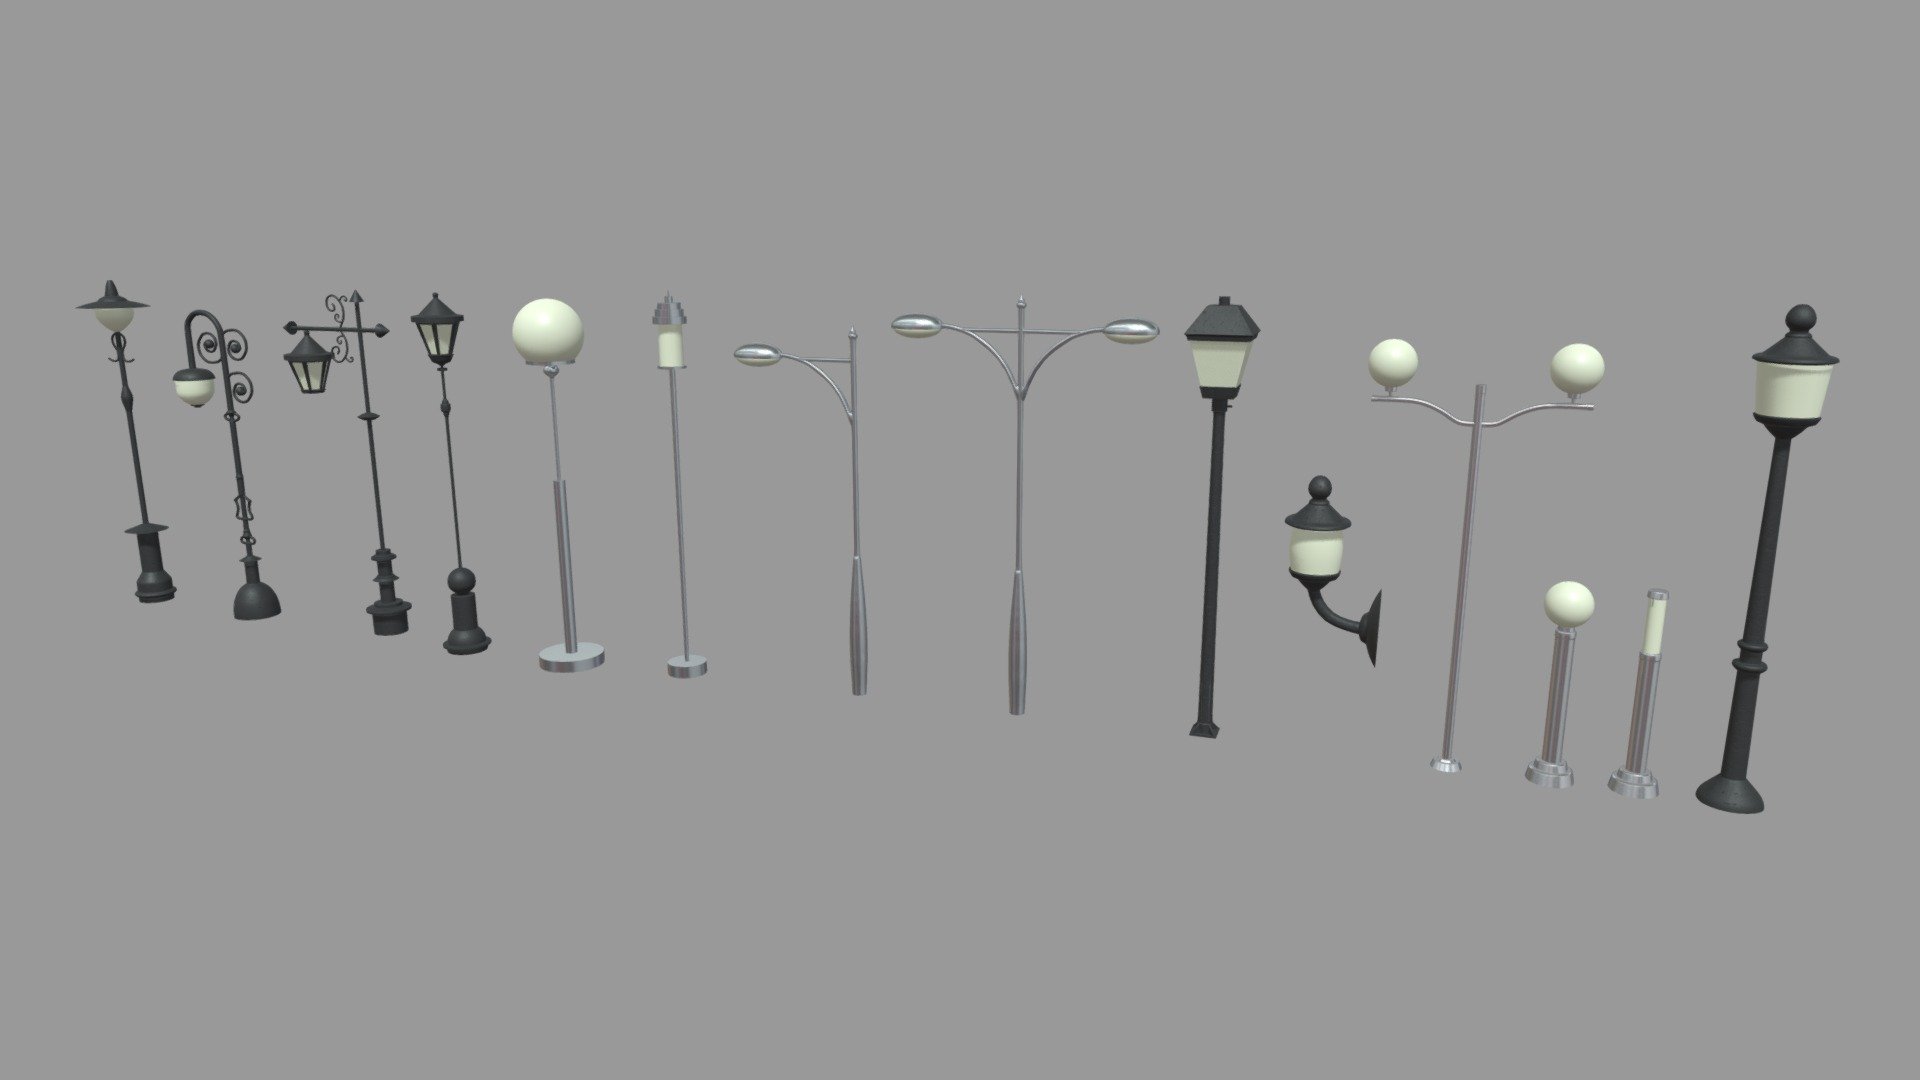 This model contains an Street Lights Pack based on realistic street lights which i modeled in Maya 2018 and texturized in Substance Painter.

The street lights will have textures, fbx, obj, mb, dae, blend and substance file, all 3 different UVS.

These models will be part of a huge city elements pack which will be added as a big pack and separately on my profile.

If you need any kind of help contact me, i will help you with everything i can. If you like the model please give me some feedback, I would appreciate it.

Don’t doubt on contacting me, i would be very happy to help. If you experience any kind of difficulties, be sure to contact me and i will help you. Sincerely Yours, ViperJr3D - Street Lights Pack - Buy Royalty Free 3D model by ViperJr3D 3d model